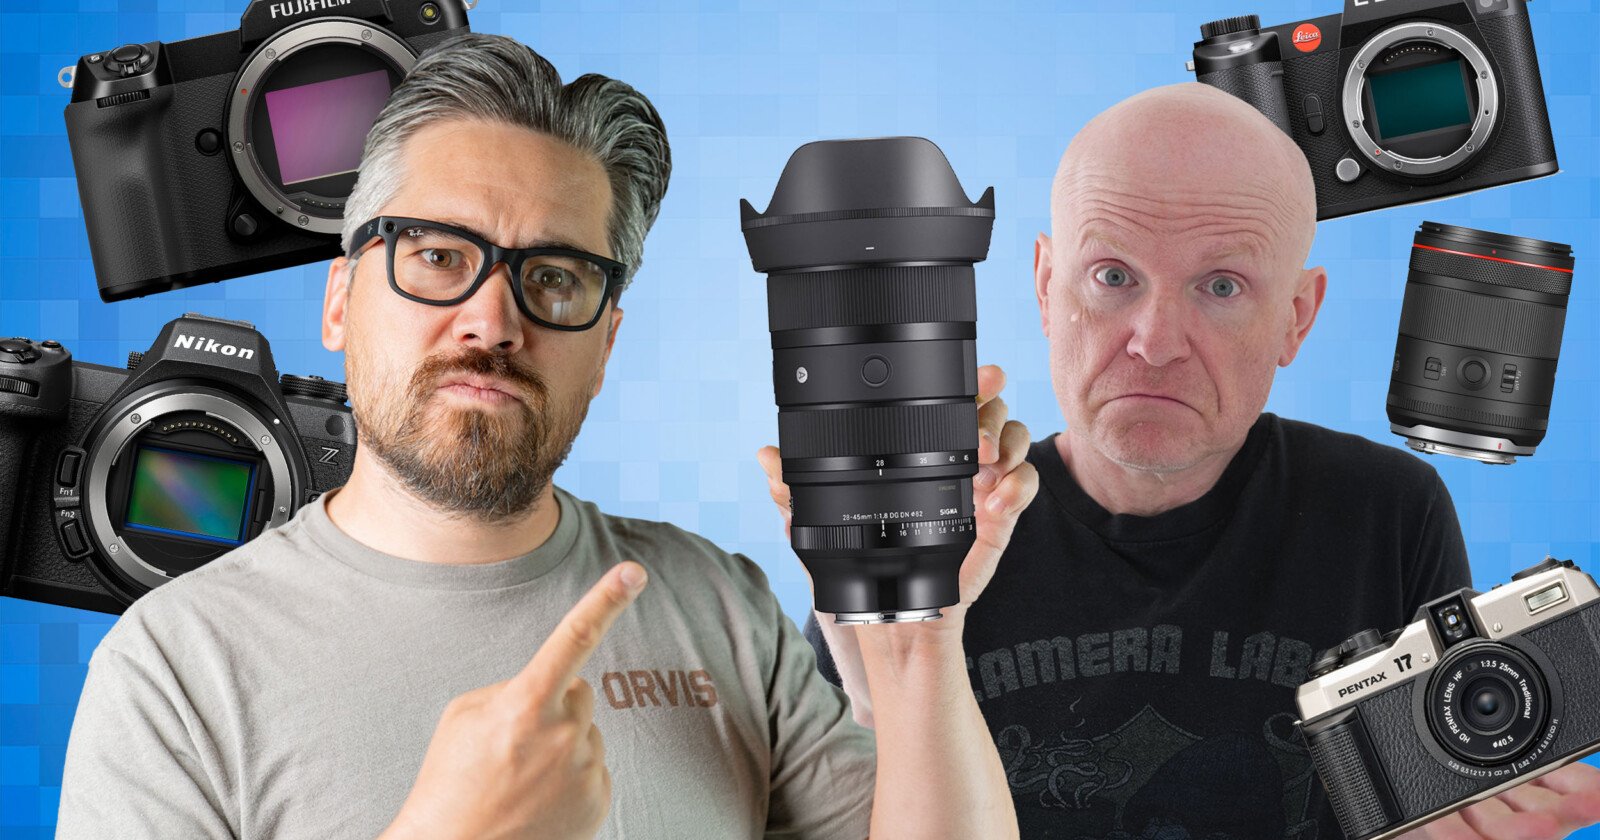 Two people are posing with various camera equipment. The person on the left, wearing glasses and a beige t-shirt, points at a large camera lens. The person on the right, wearing a black t-shirt, holds another lens. Multiple cameras and lenses float in the blue background.